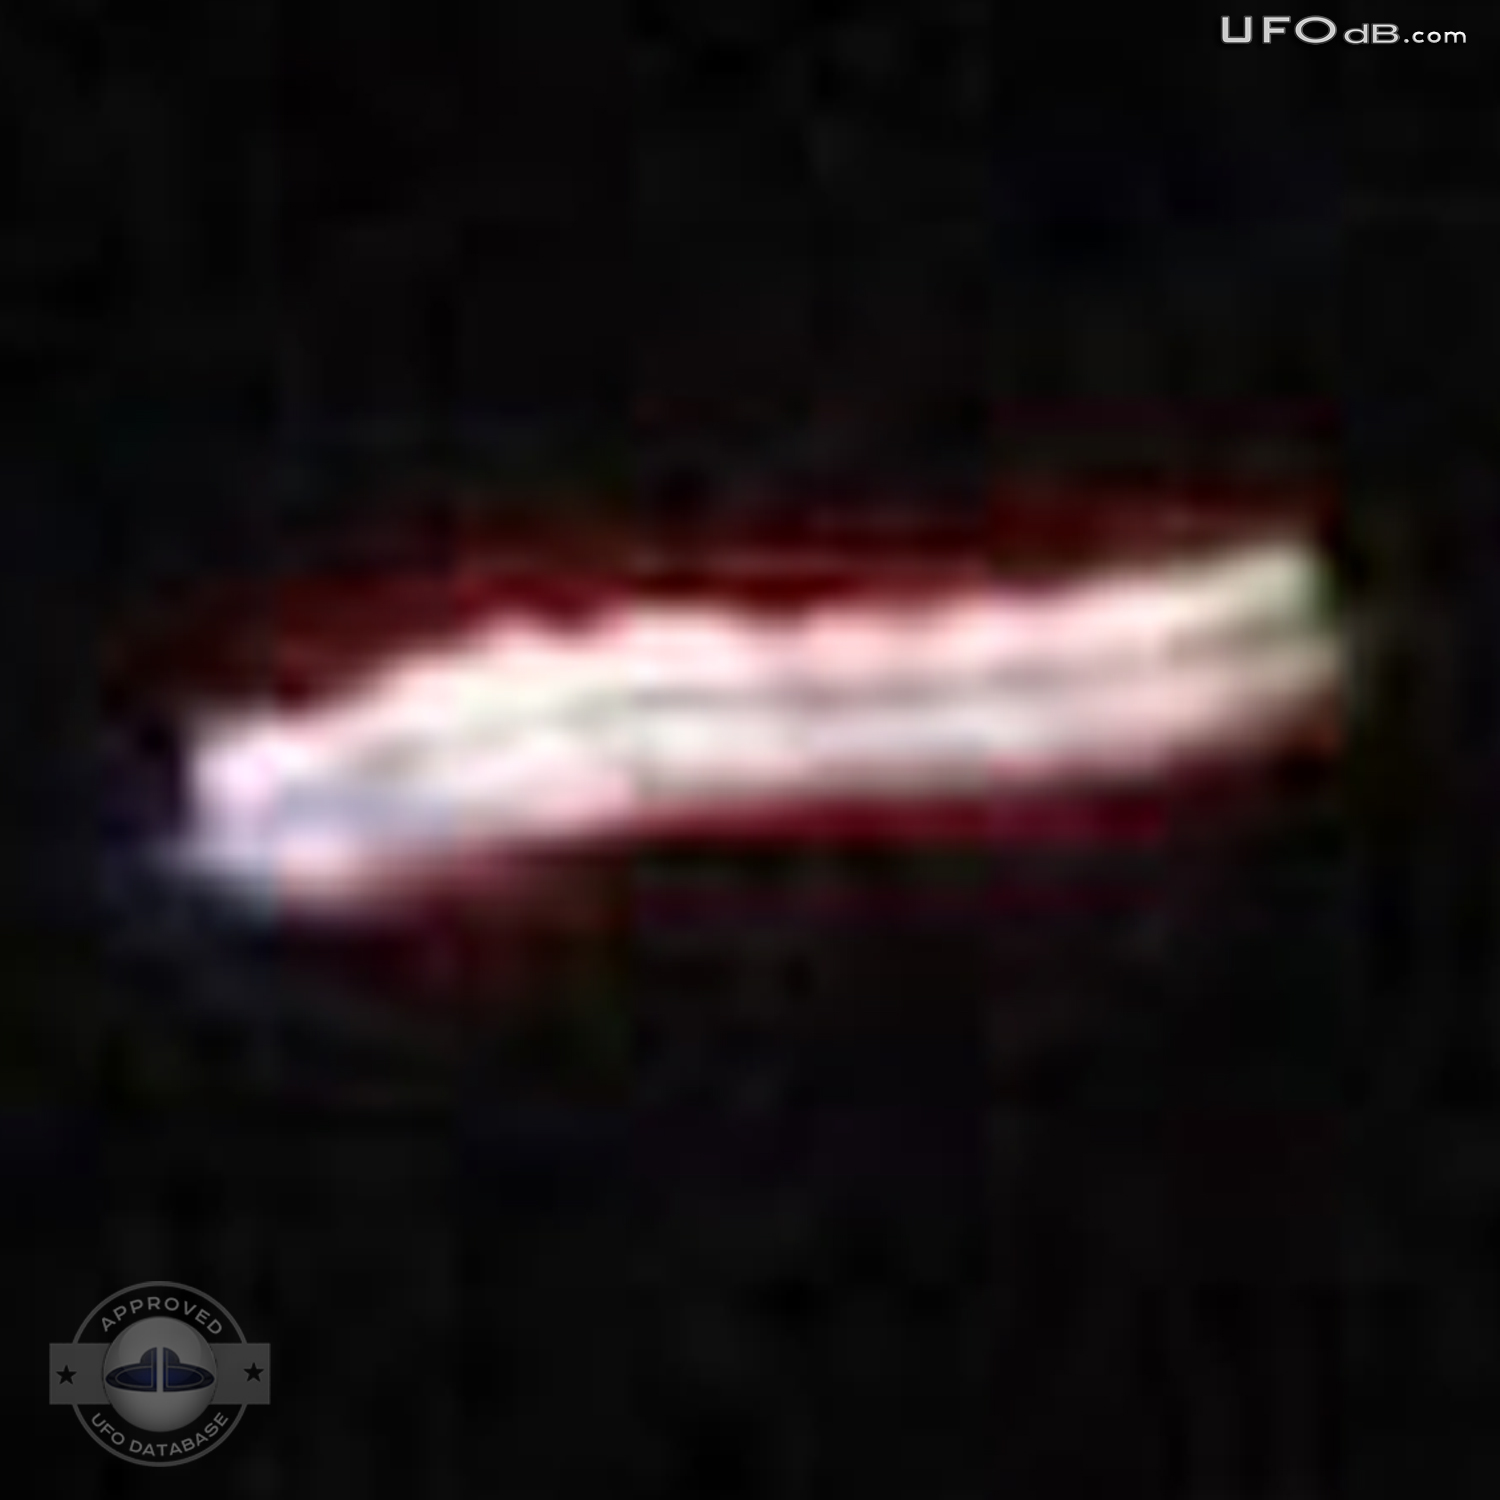 Bouncing UFO seen during Eclipse in Dominican Republic | December 2010 UFO Picture #313-5